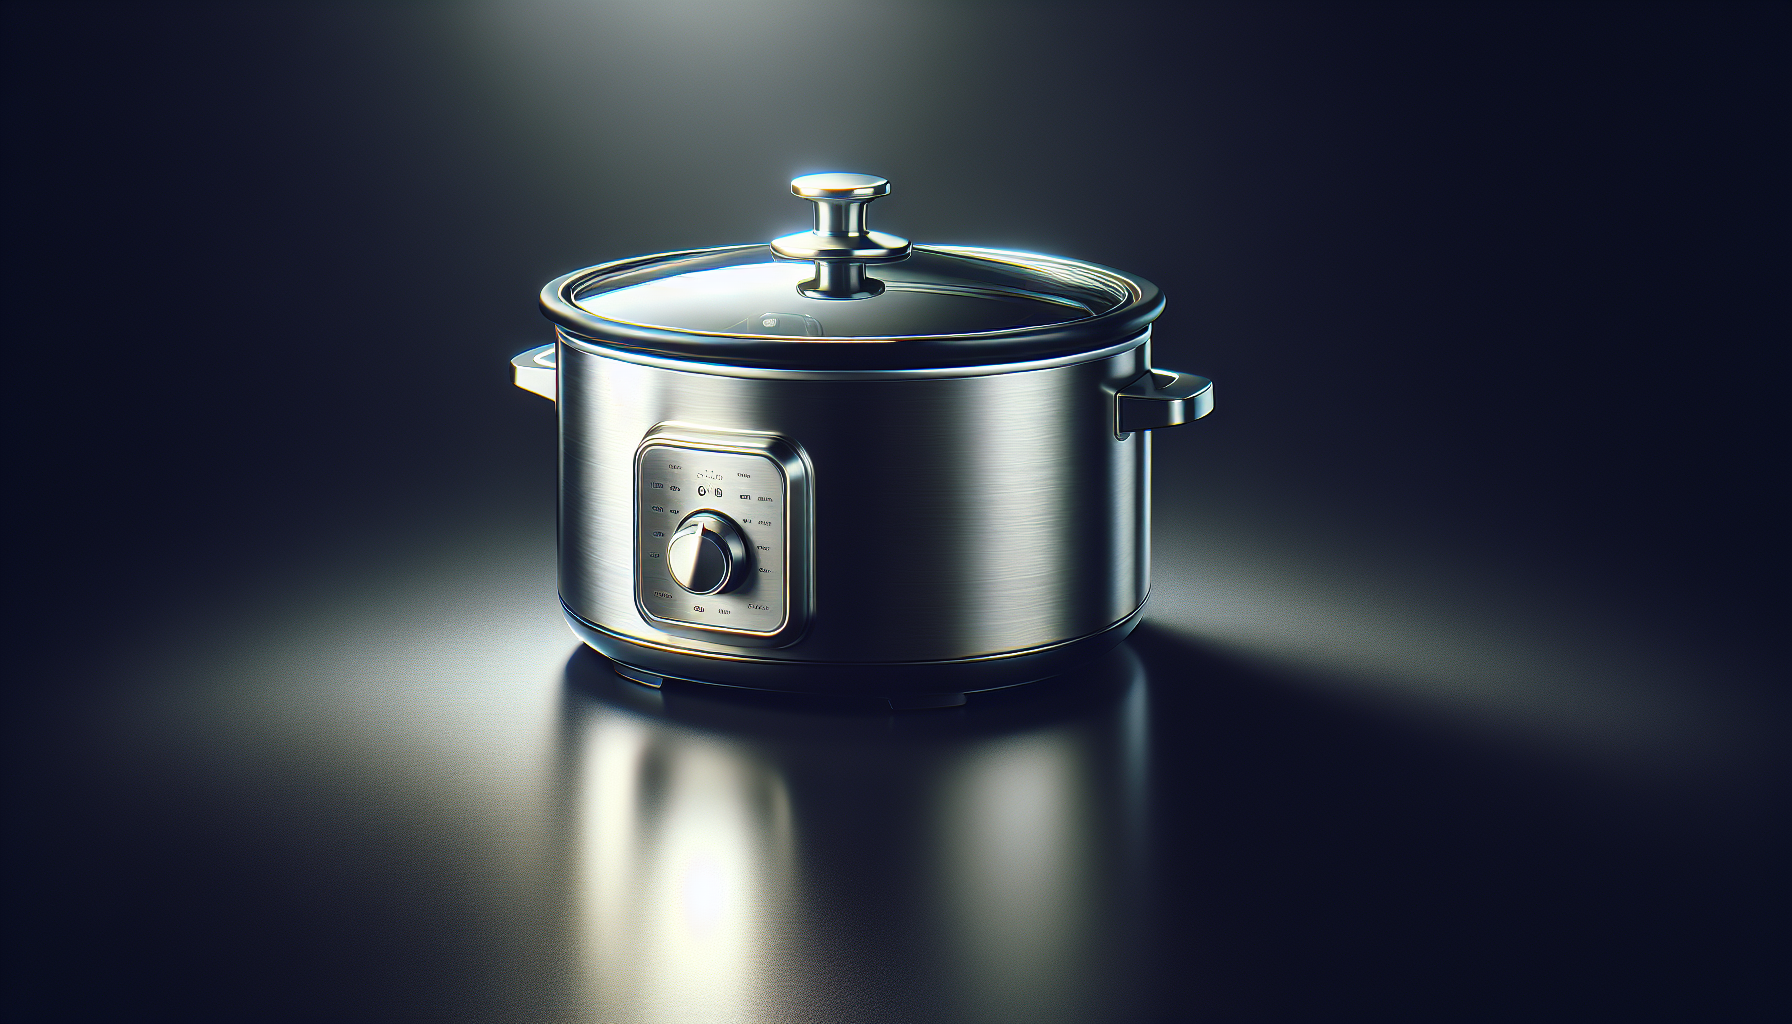 Dishwasher-Safe Stainless Steel Slow Cooker Review